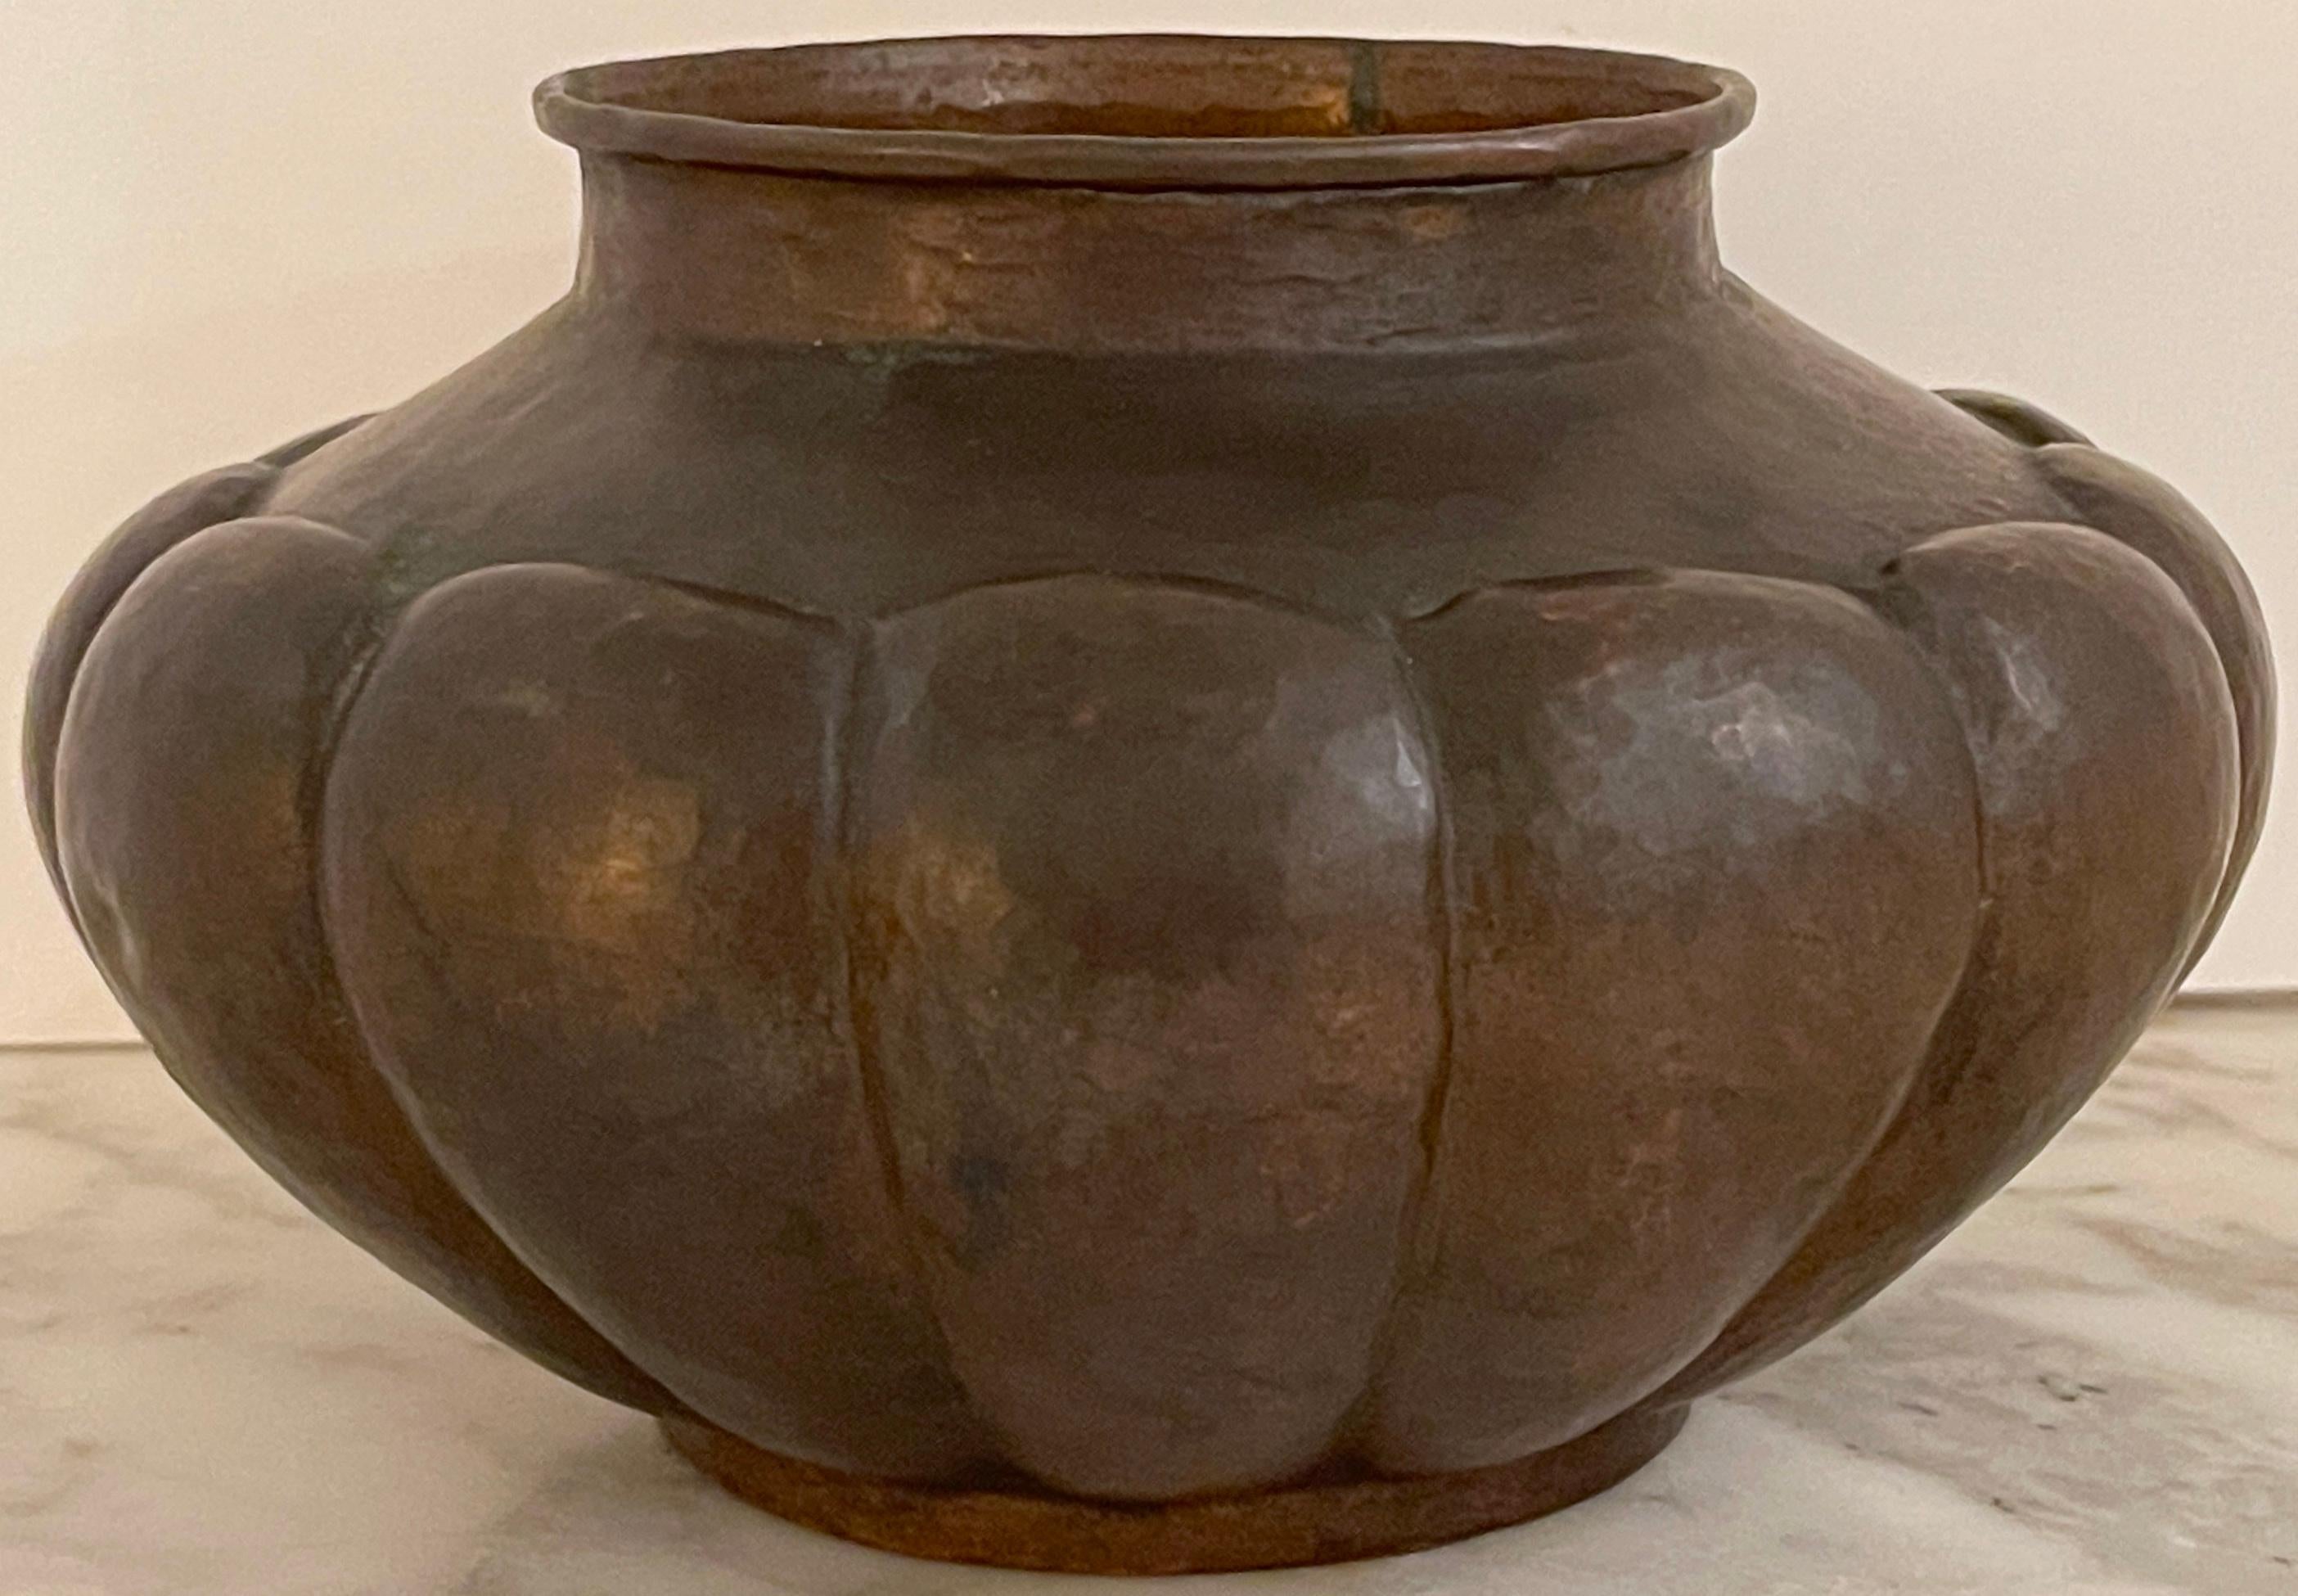 Roycroft Arts & Crafts Copper Forged Bulbous Vase/Oil Lamp Base Roycroft Inn at East Aurora, NY
USA, circa 1905

Available for acquisition is this fine Roycroft Arts & Crafts Copper Forged Bulbous Vase, with roots tracing back to the renowned